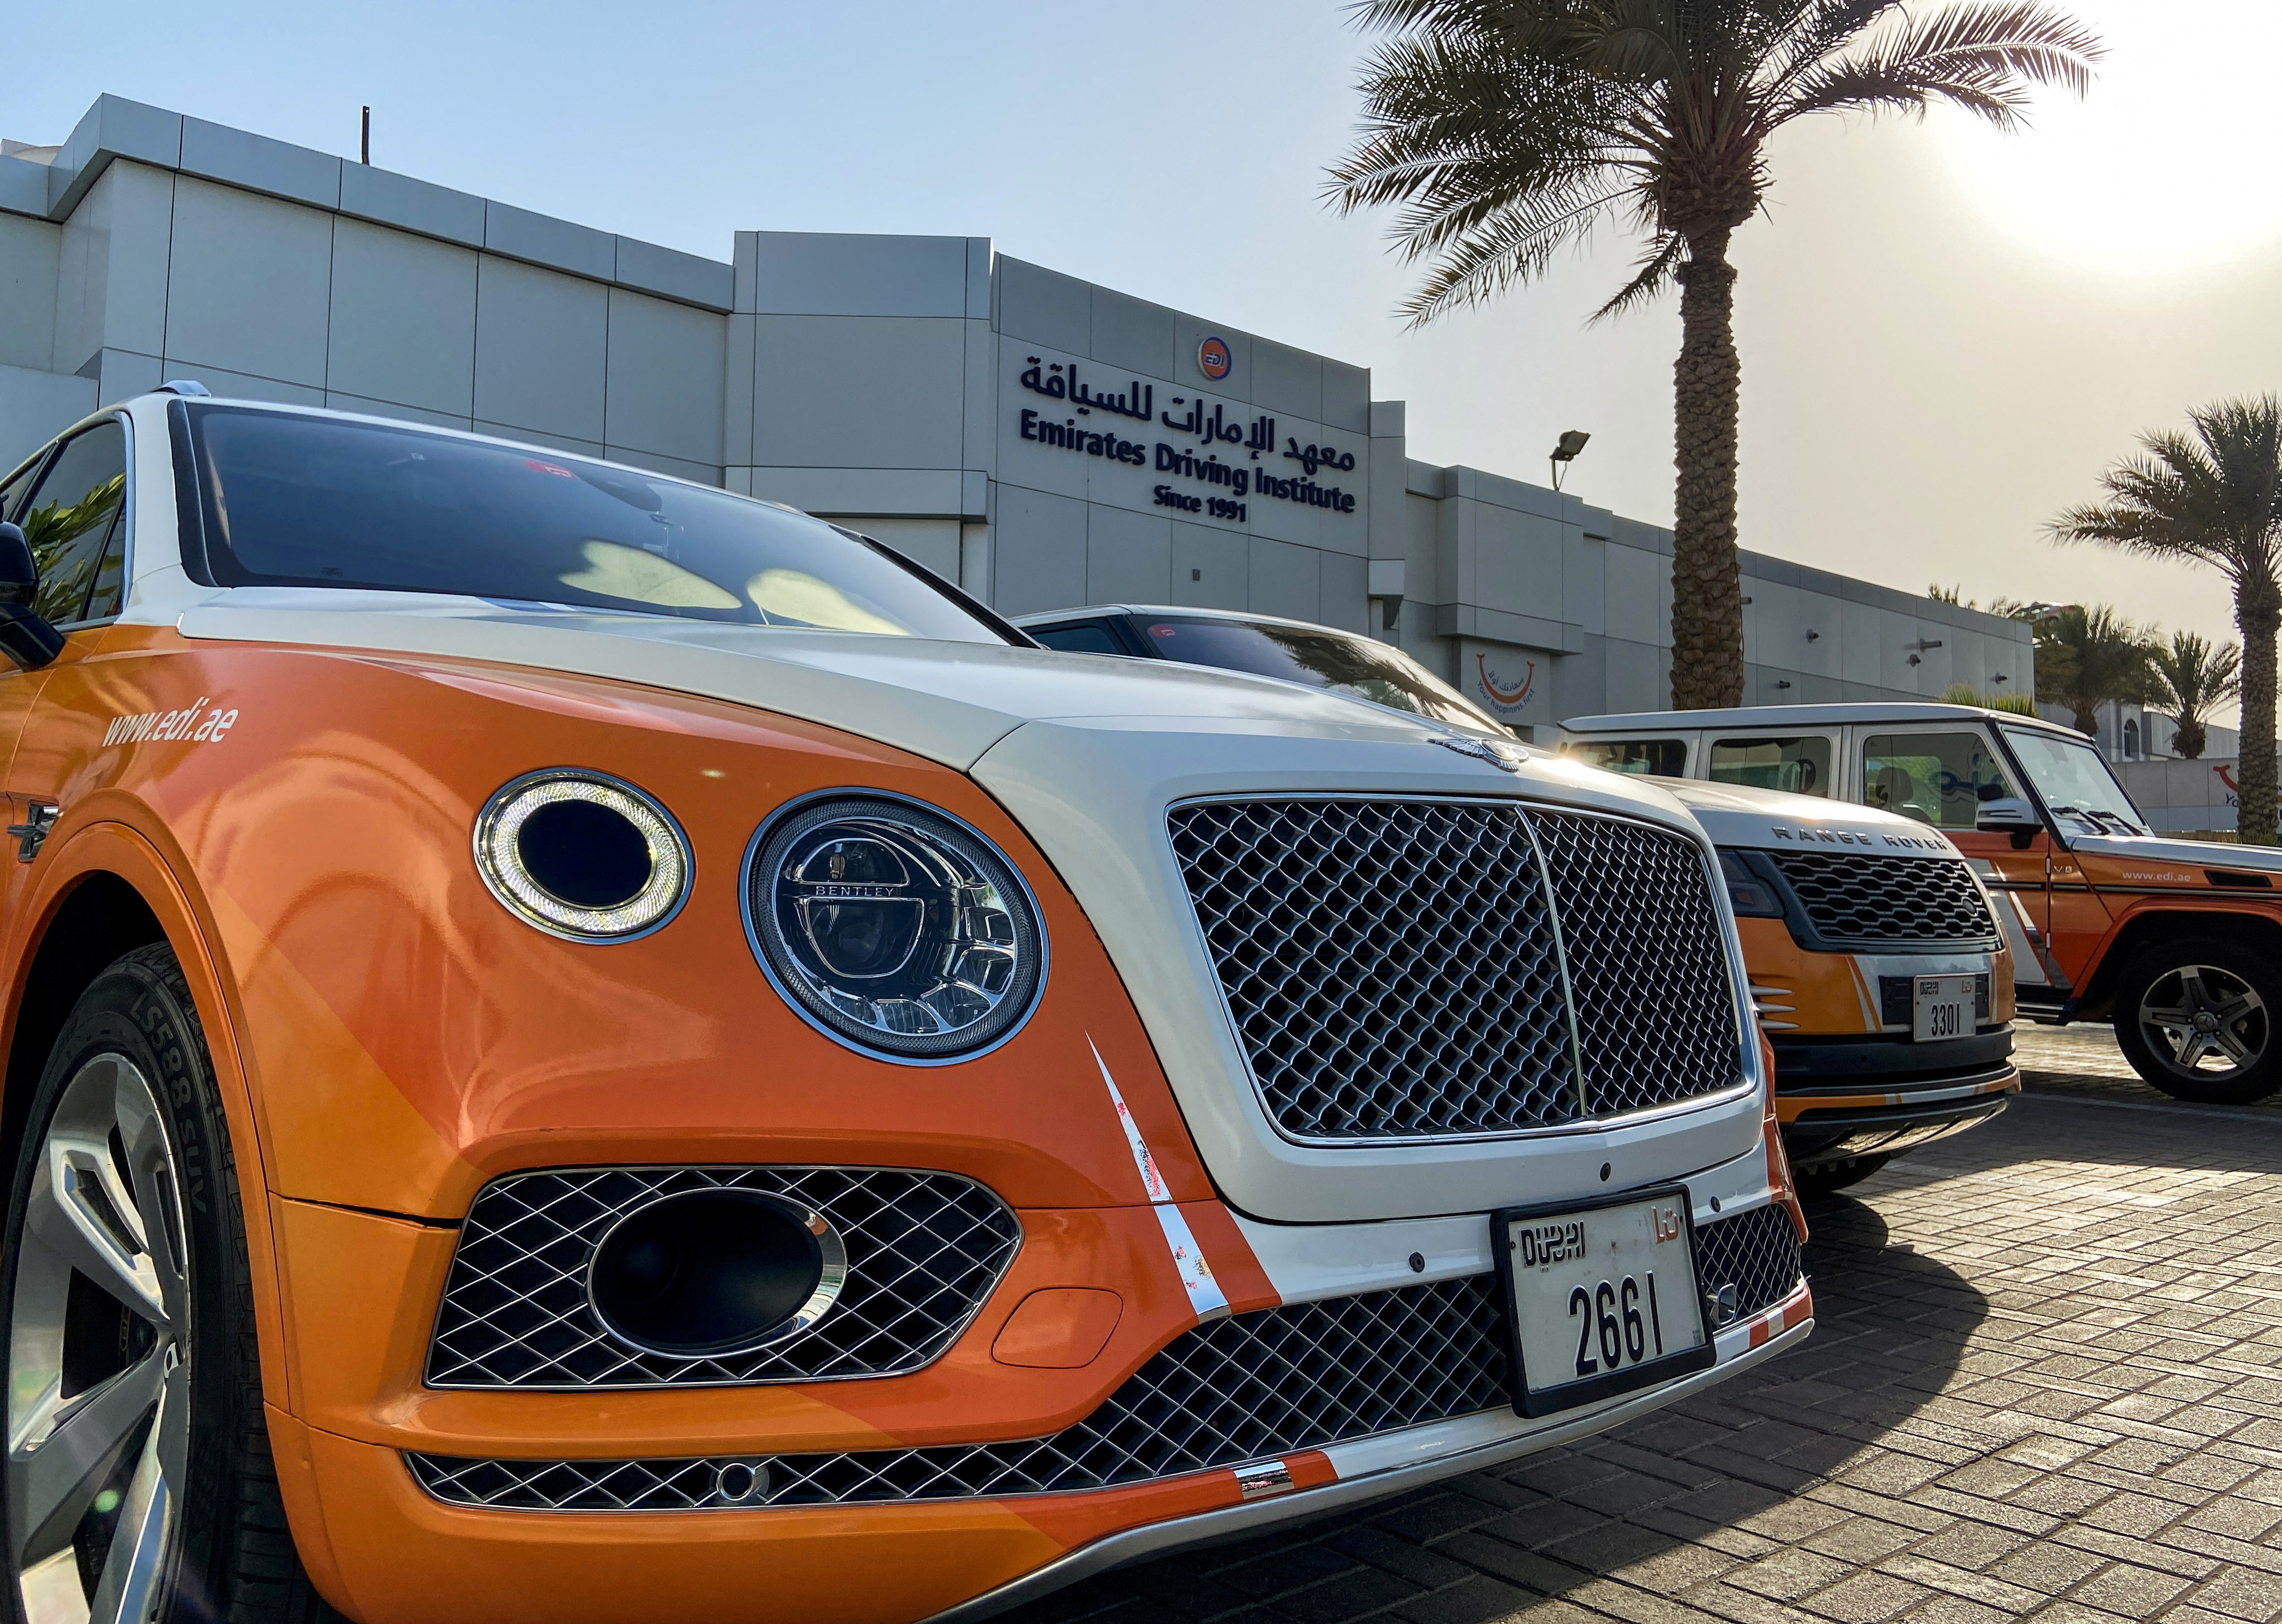 A Bentley car is seen at the Emirates Driving Institute which offers students to learn how to drive on luxury cars, in Dubai